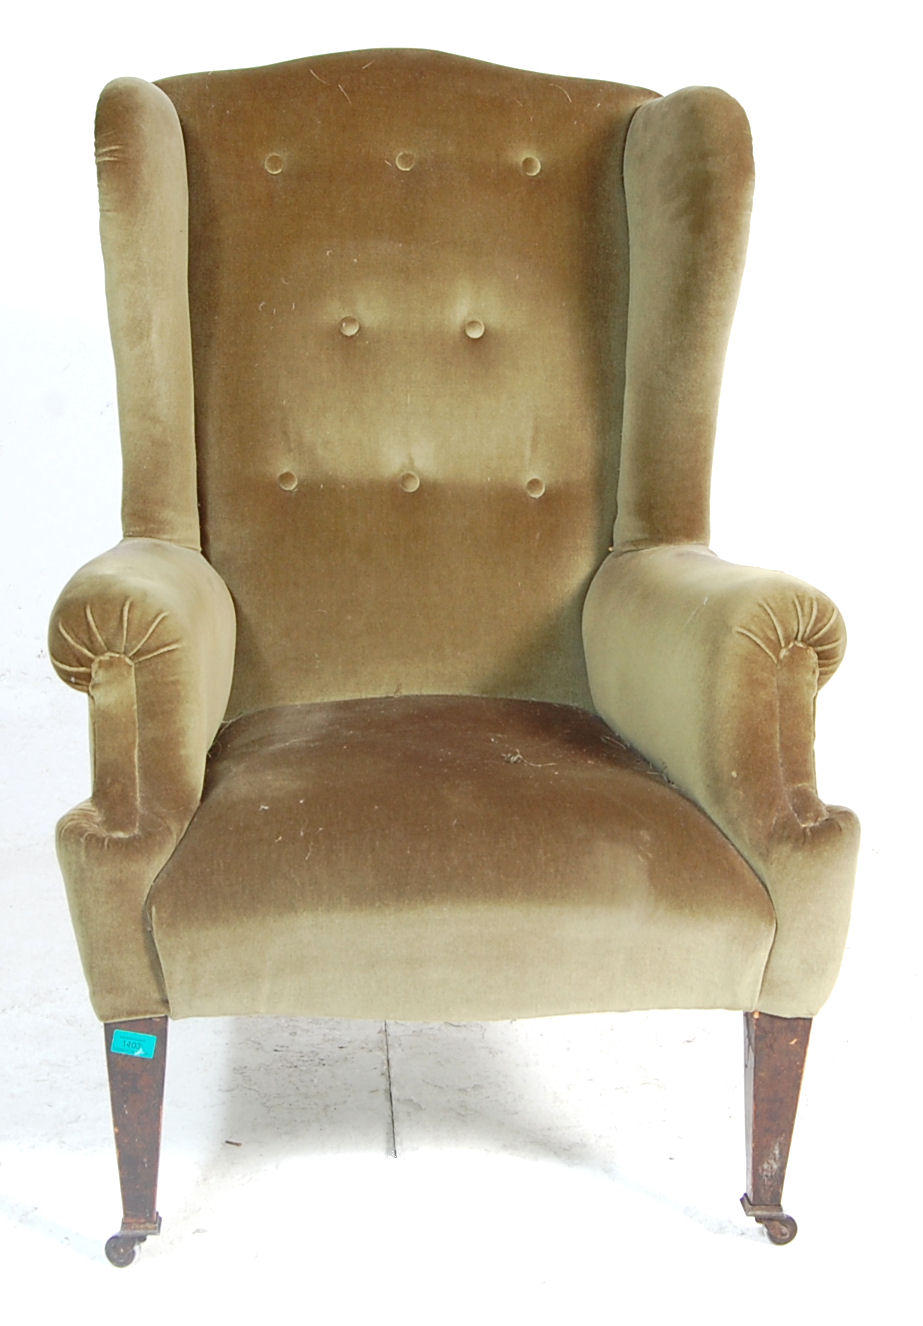 ANTIQUE EDWARDIAN QUEEN ANNE STYLE ARMCHAIR - Image 2 of 4